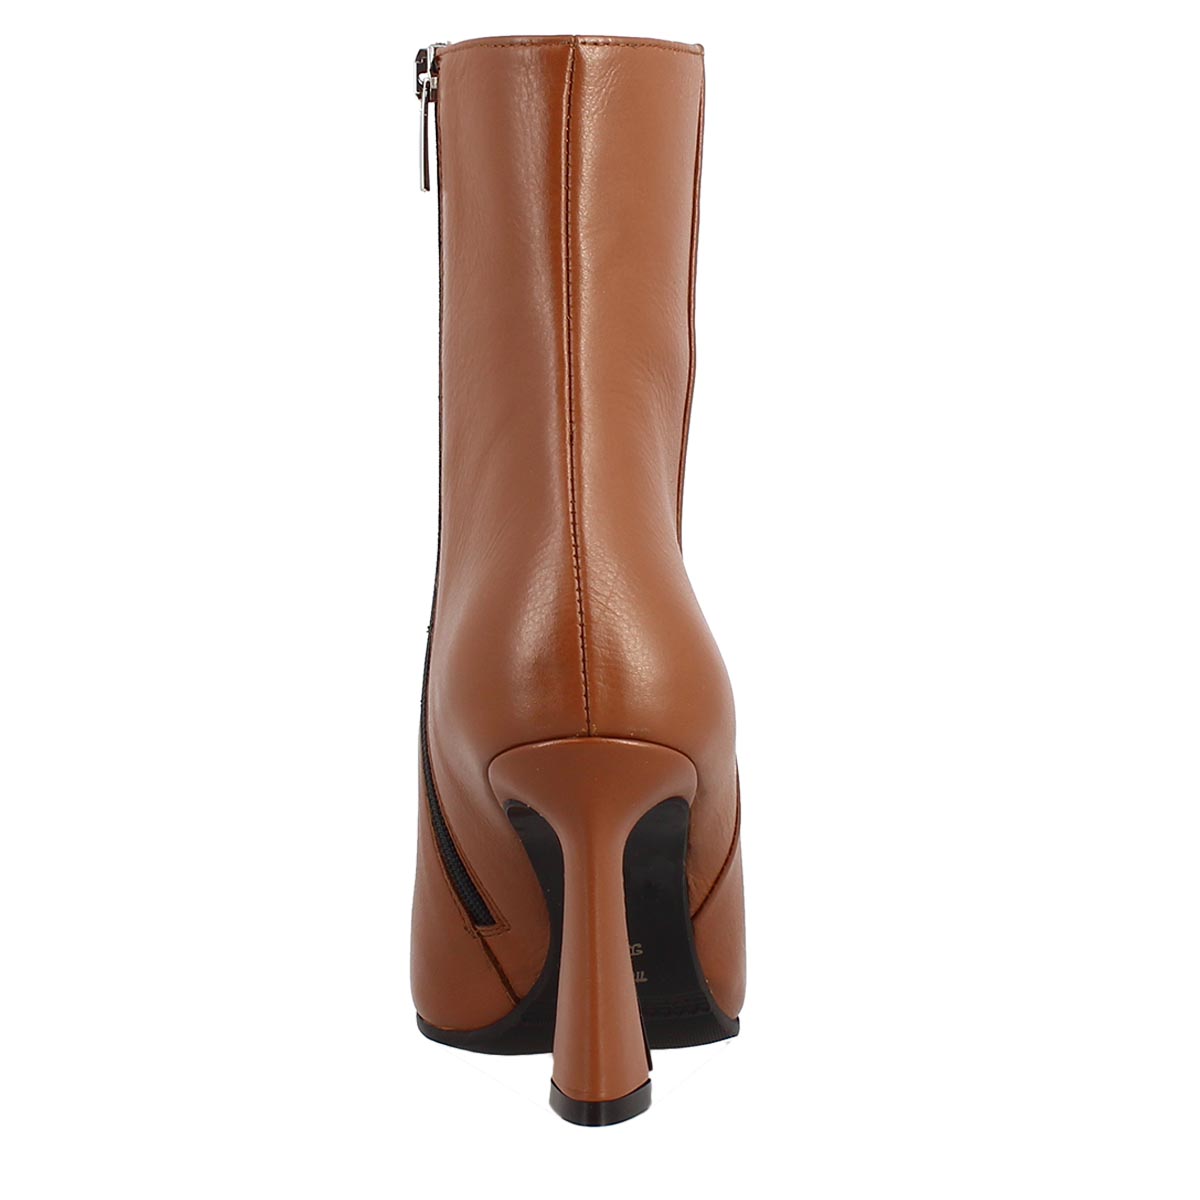 Ankle boot in brown Vienna leather 